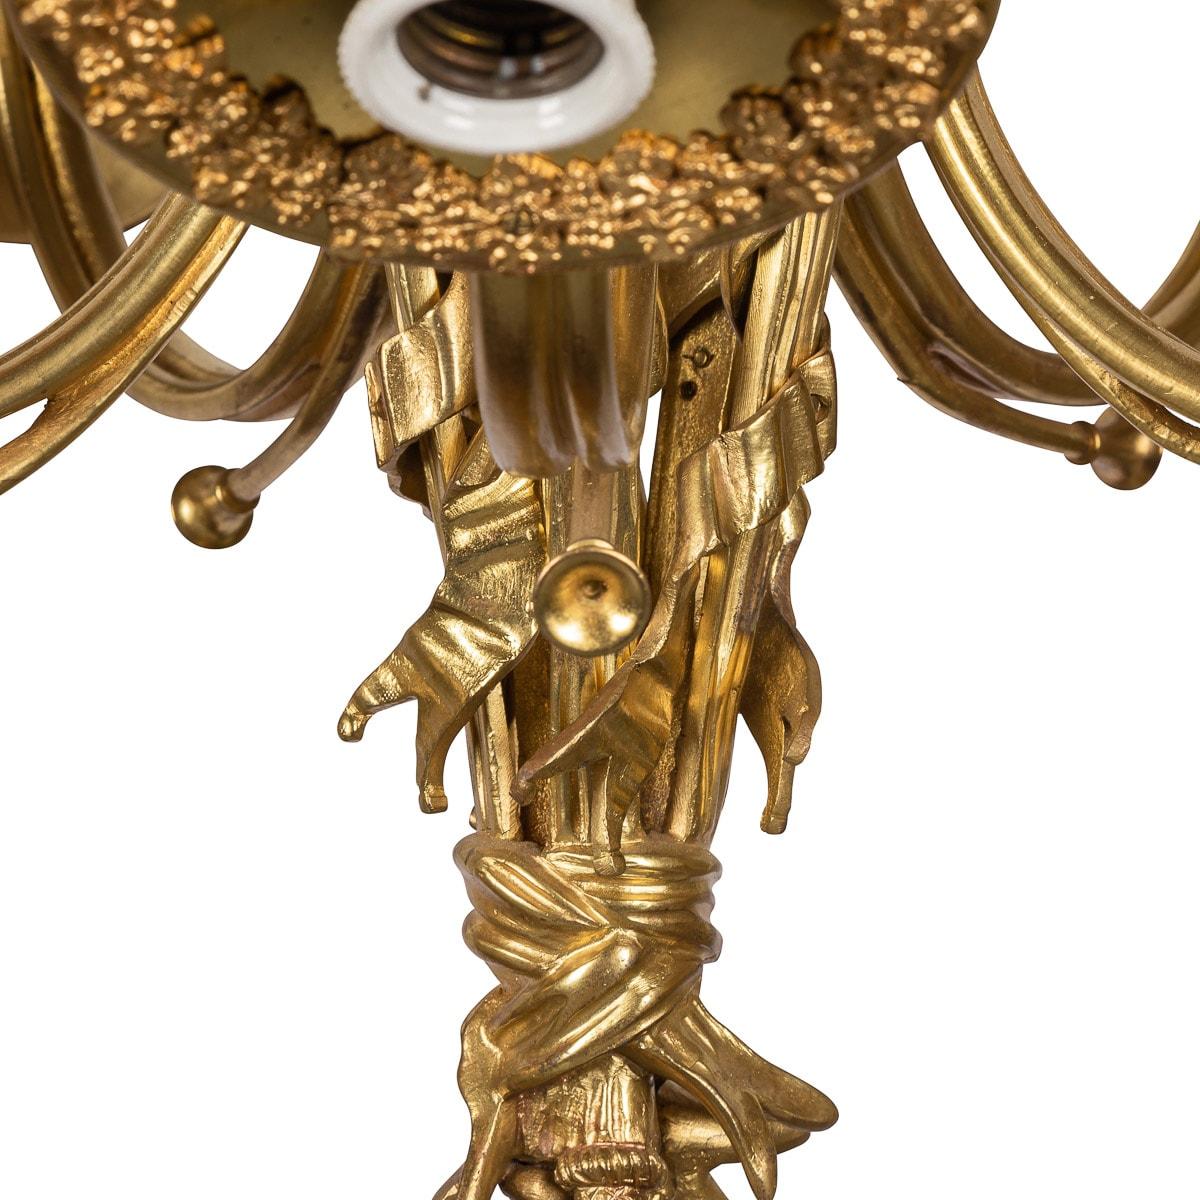 19th Century French Empire Ormolu Chandelier With Trumpet Light Fittings, c.1870 For Sale 1